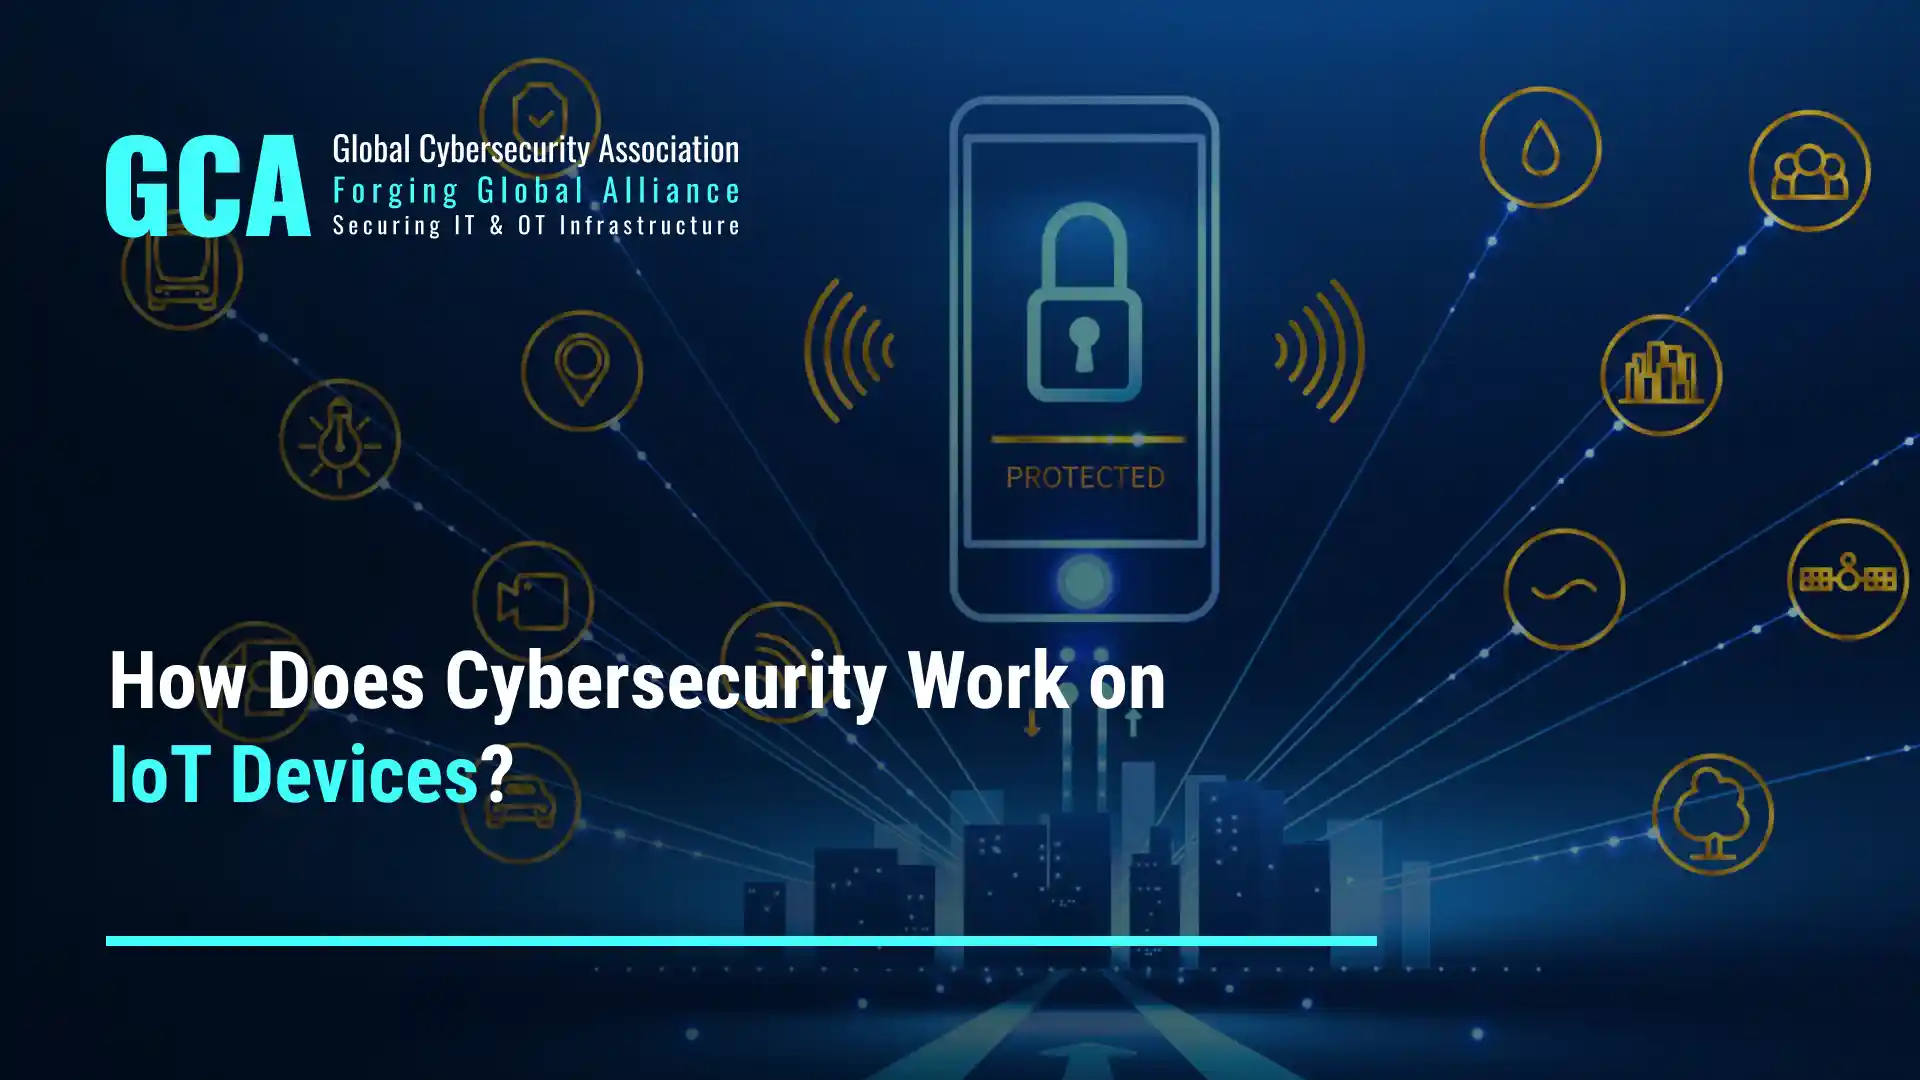 How Does Cybersecurity Work on IoT Devices?